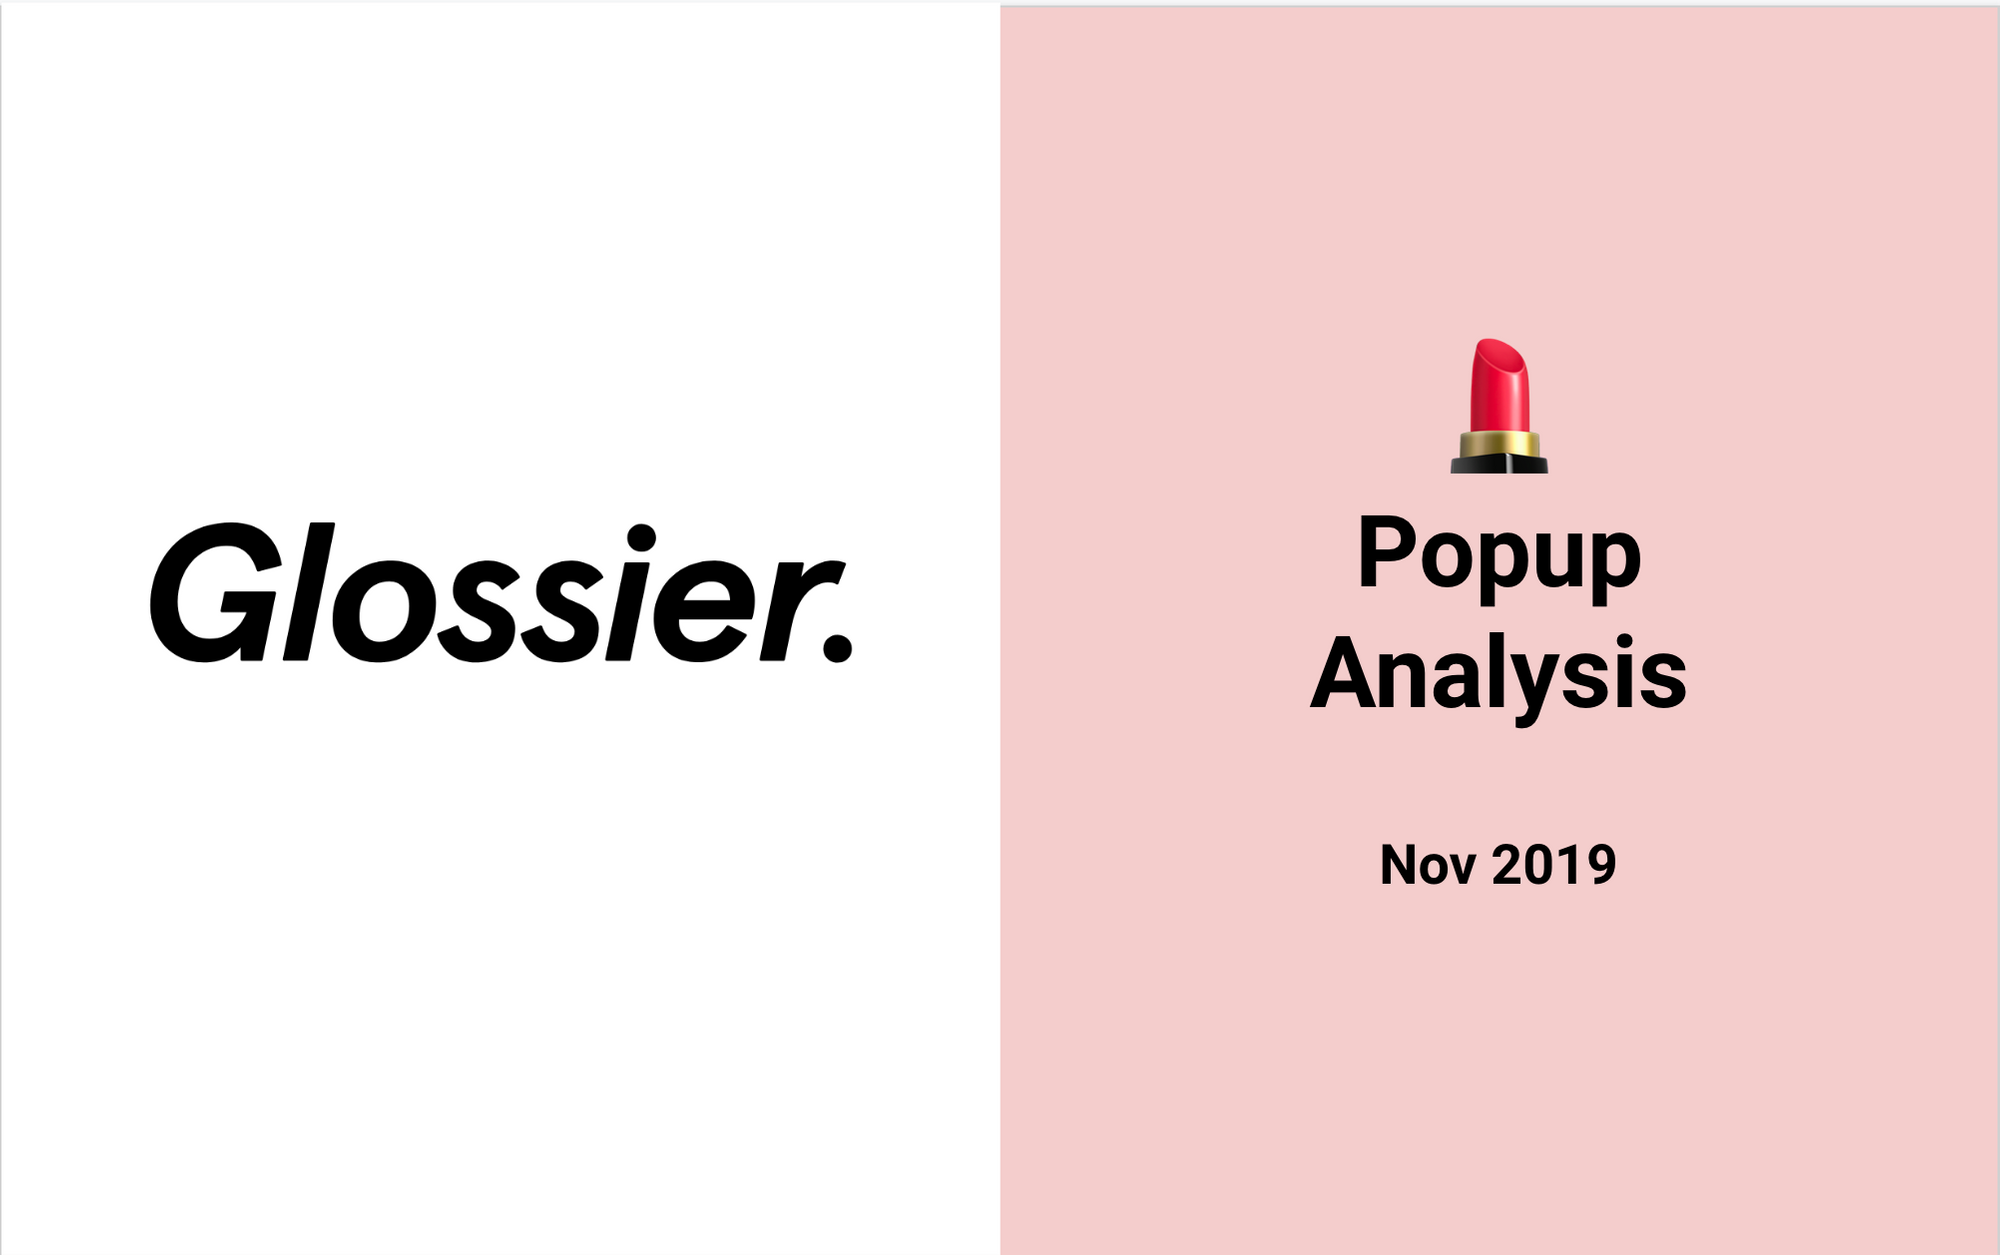 How does Glossier generate traffic using Pop-ups?